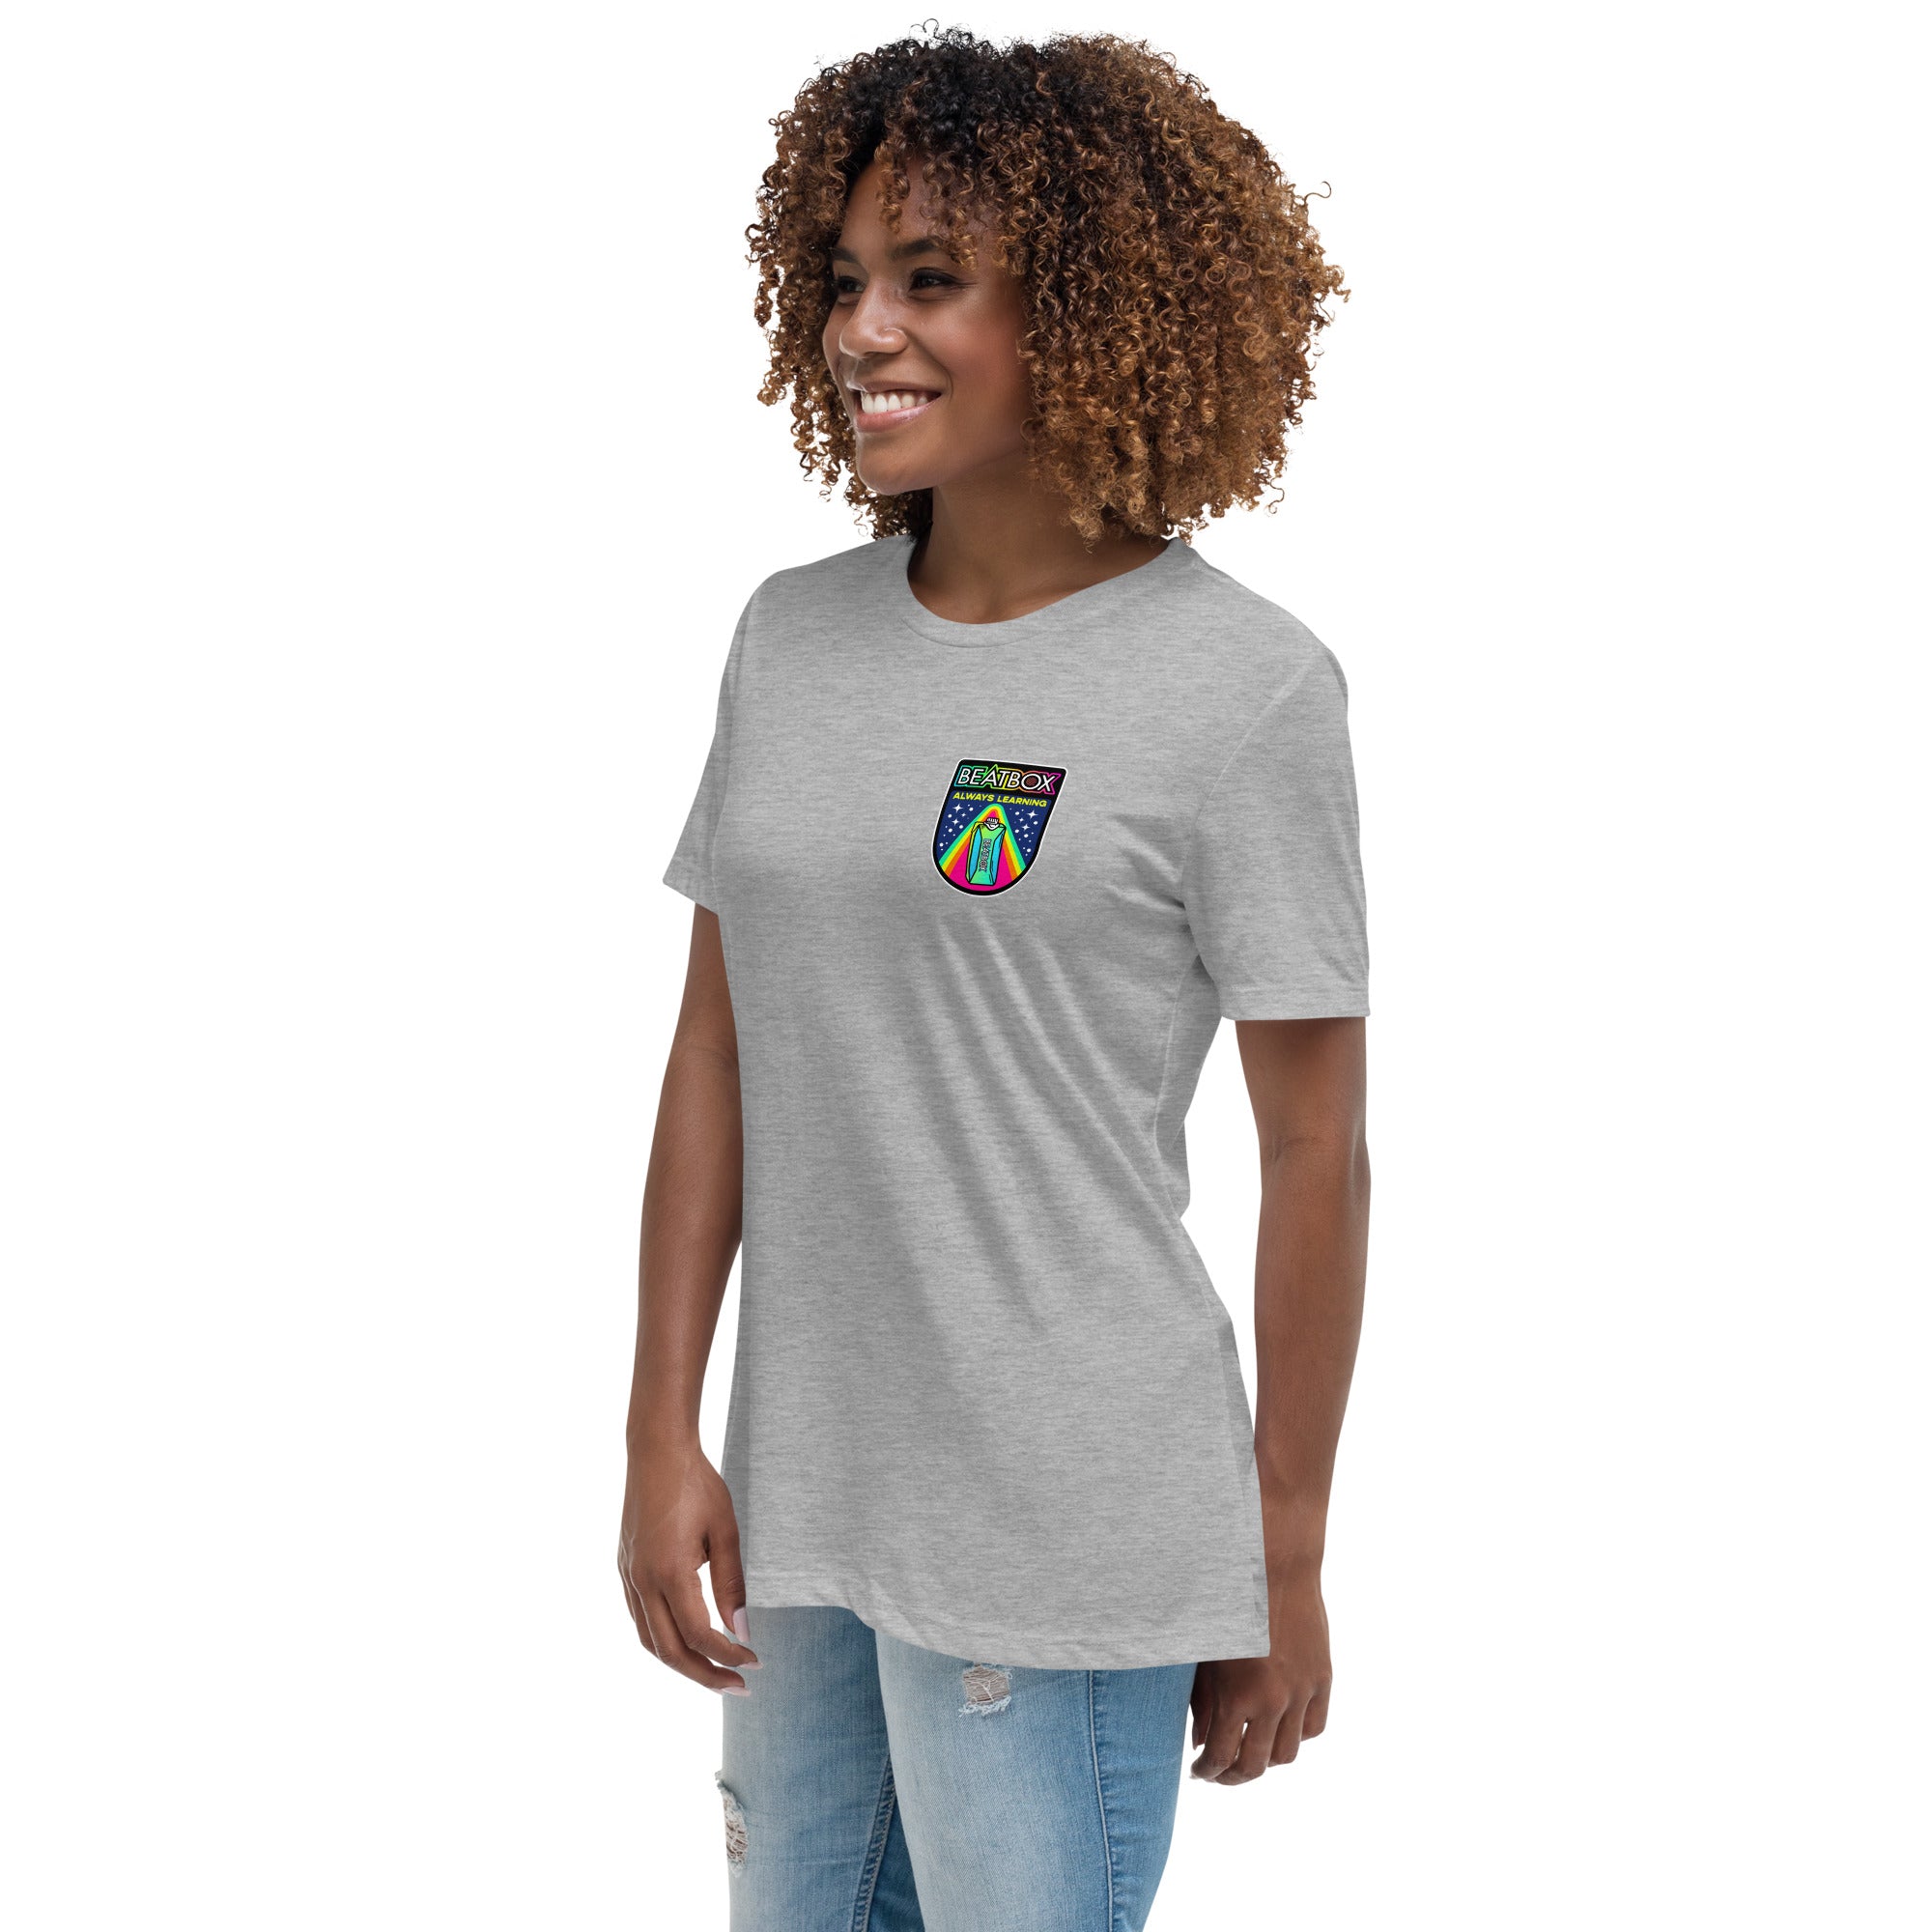 Always Learning Women's Relaxed T-Shirt